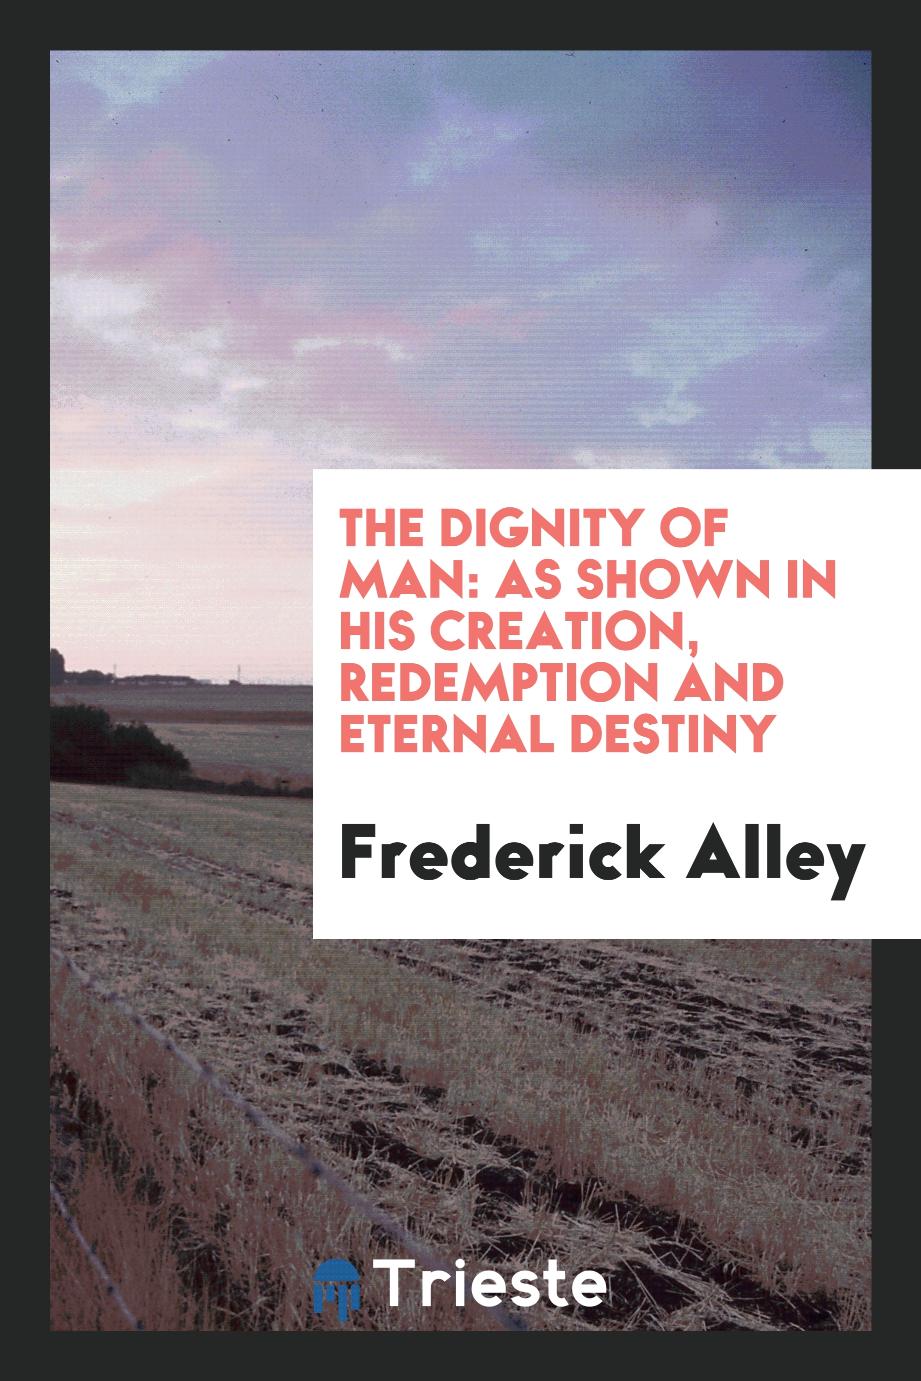 The Dignity of Man: As Shown in His Creation, Redemption and Eternal Destiny